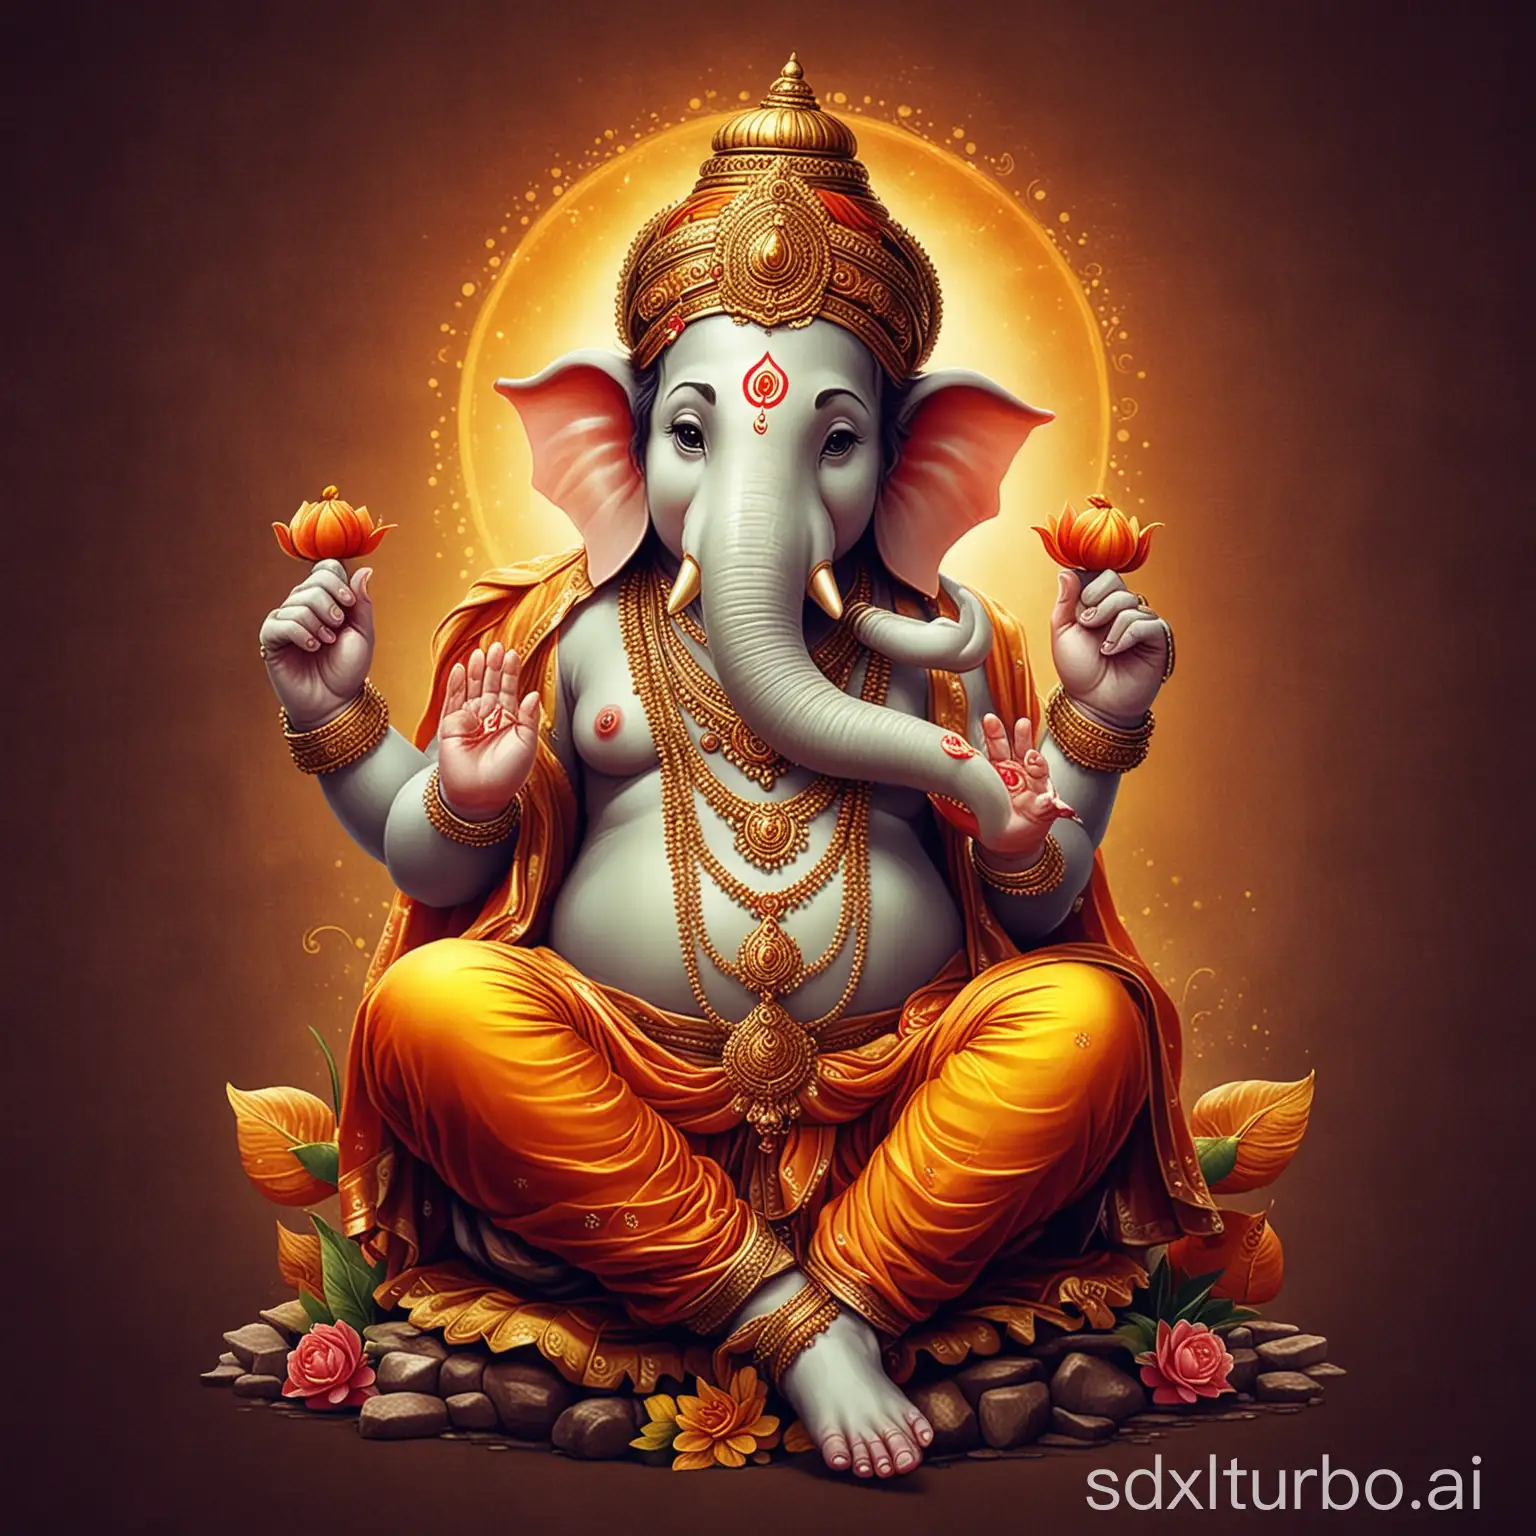 Lord Ganesh walpaper for laptop